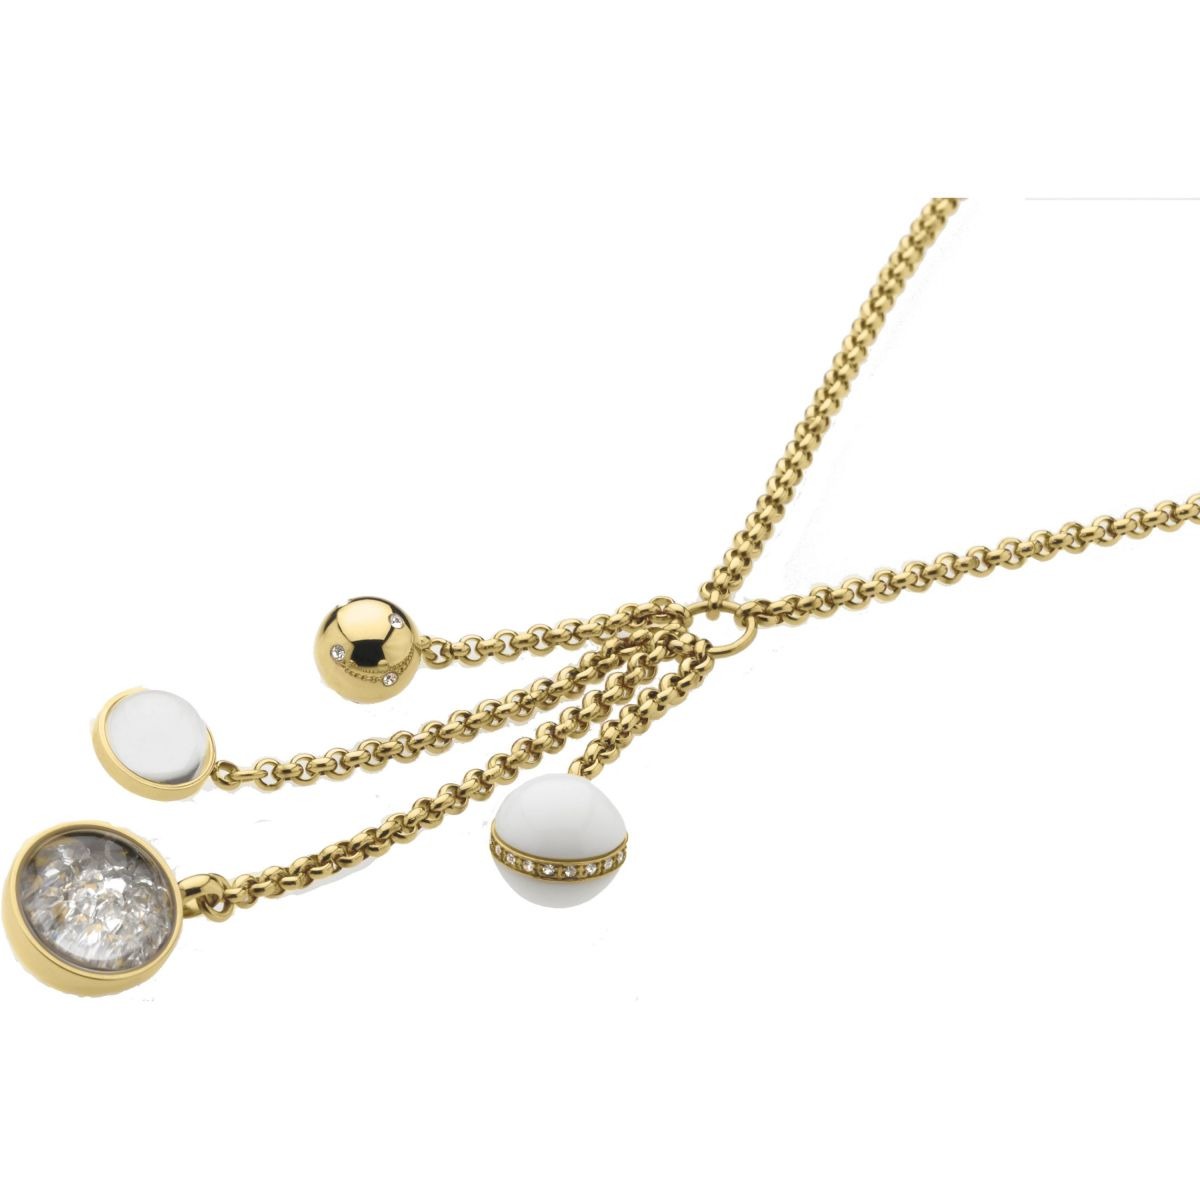 Storm - Womens Necklace in Gold at Watch Shop GOOFASH